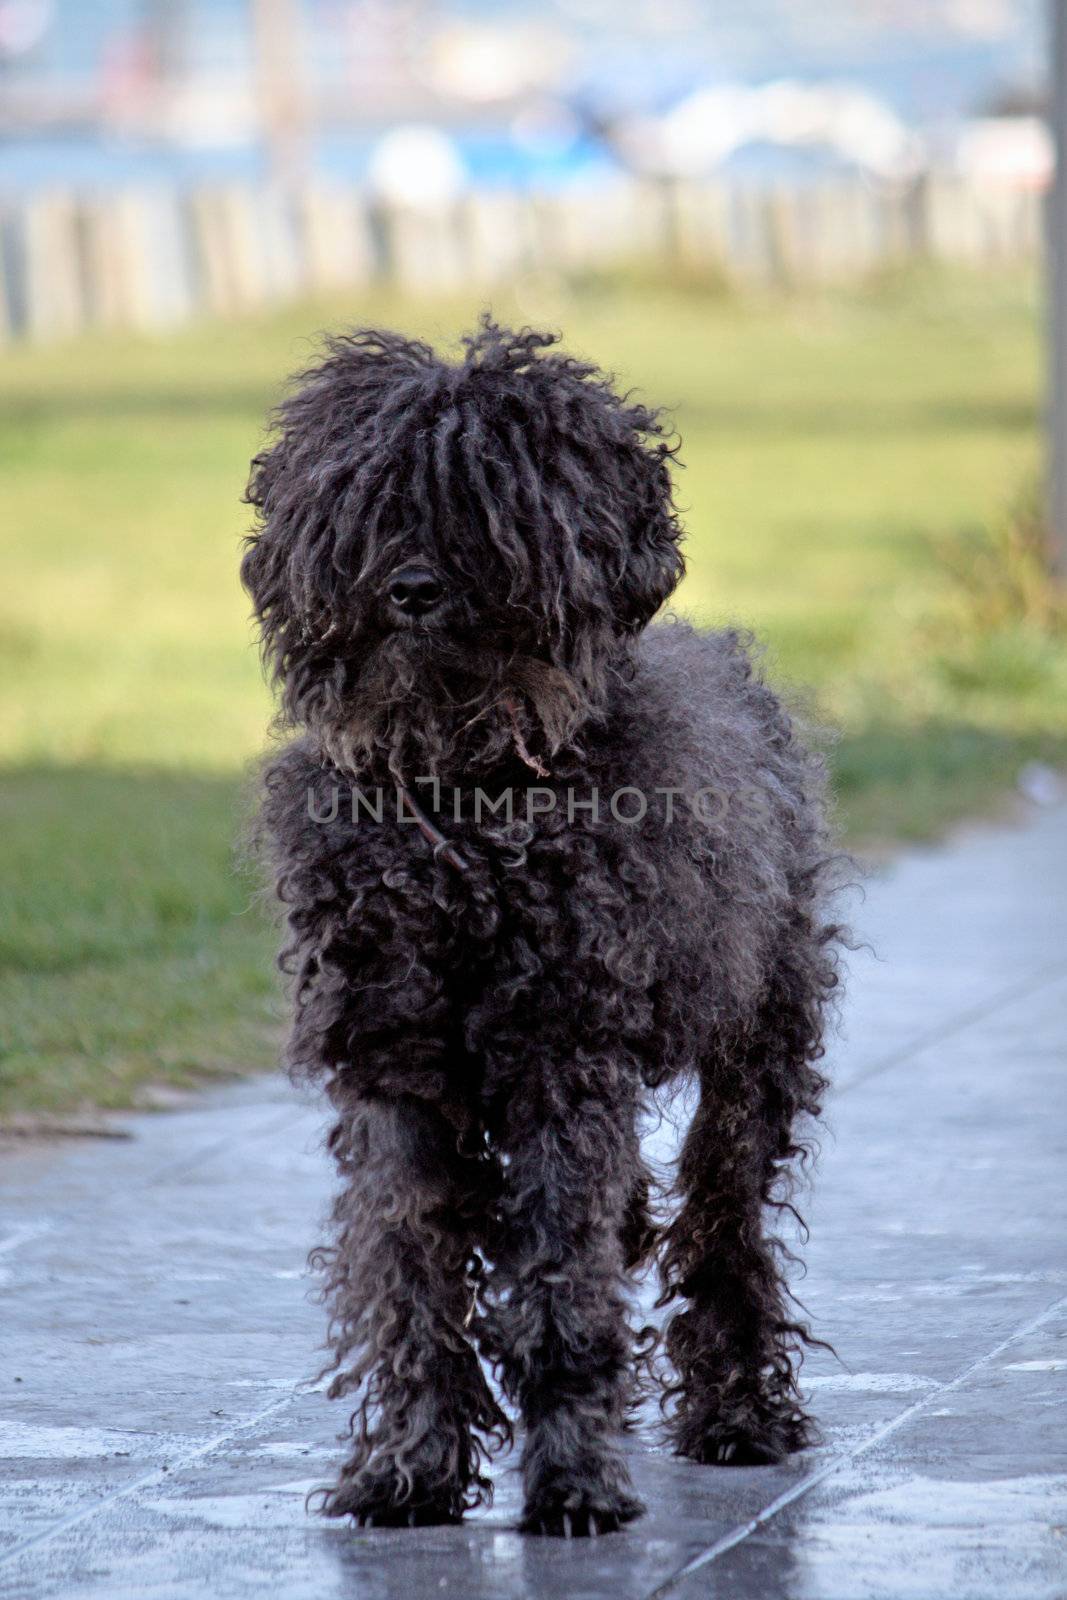 View of an adorable small black domestic dog with curly fur.